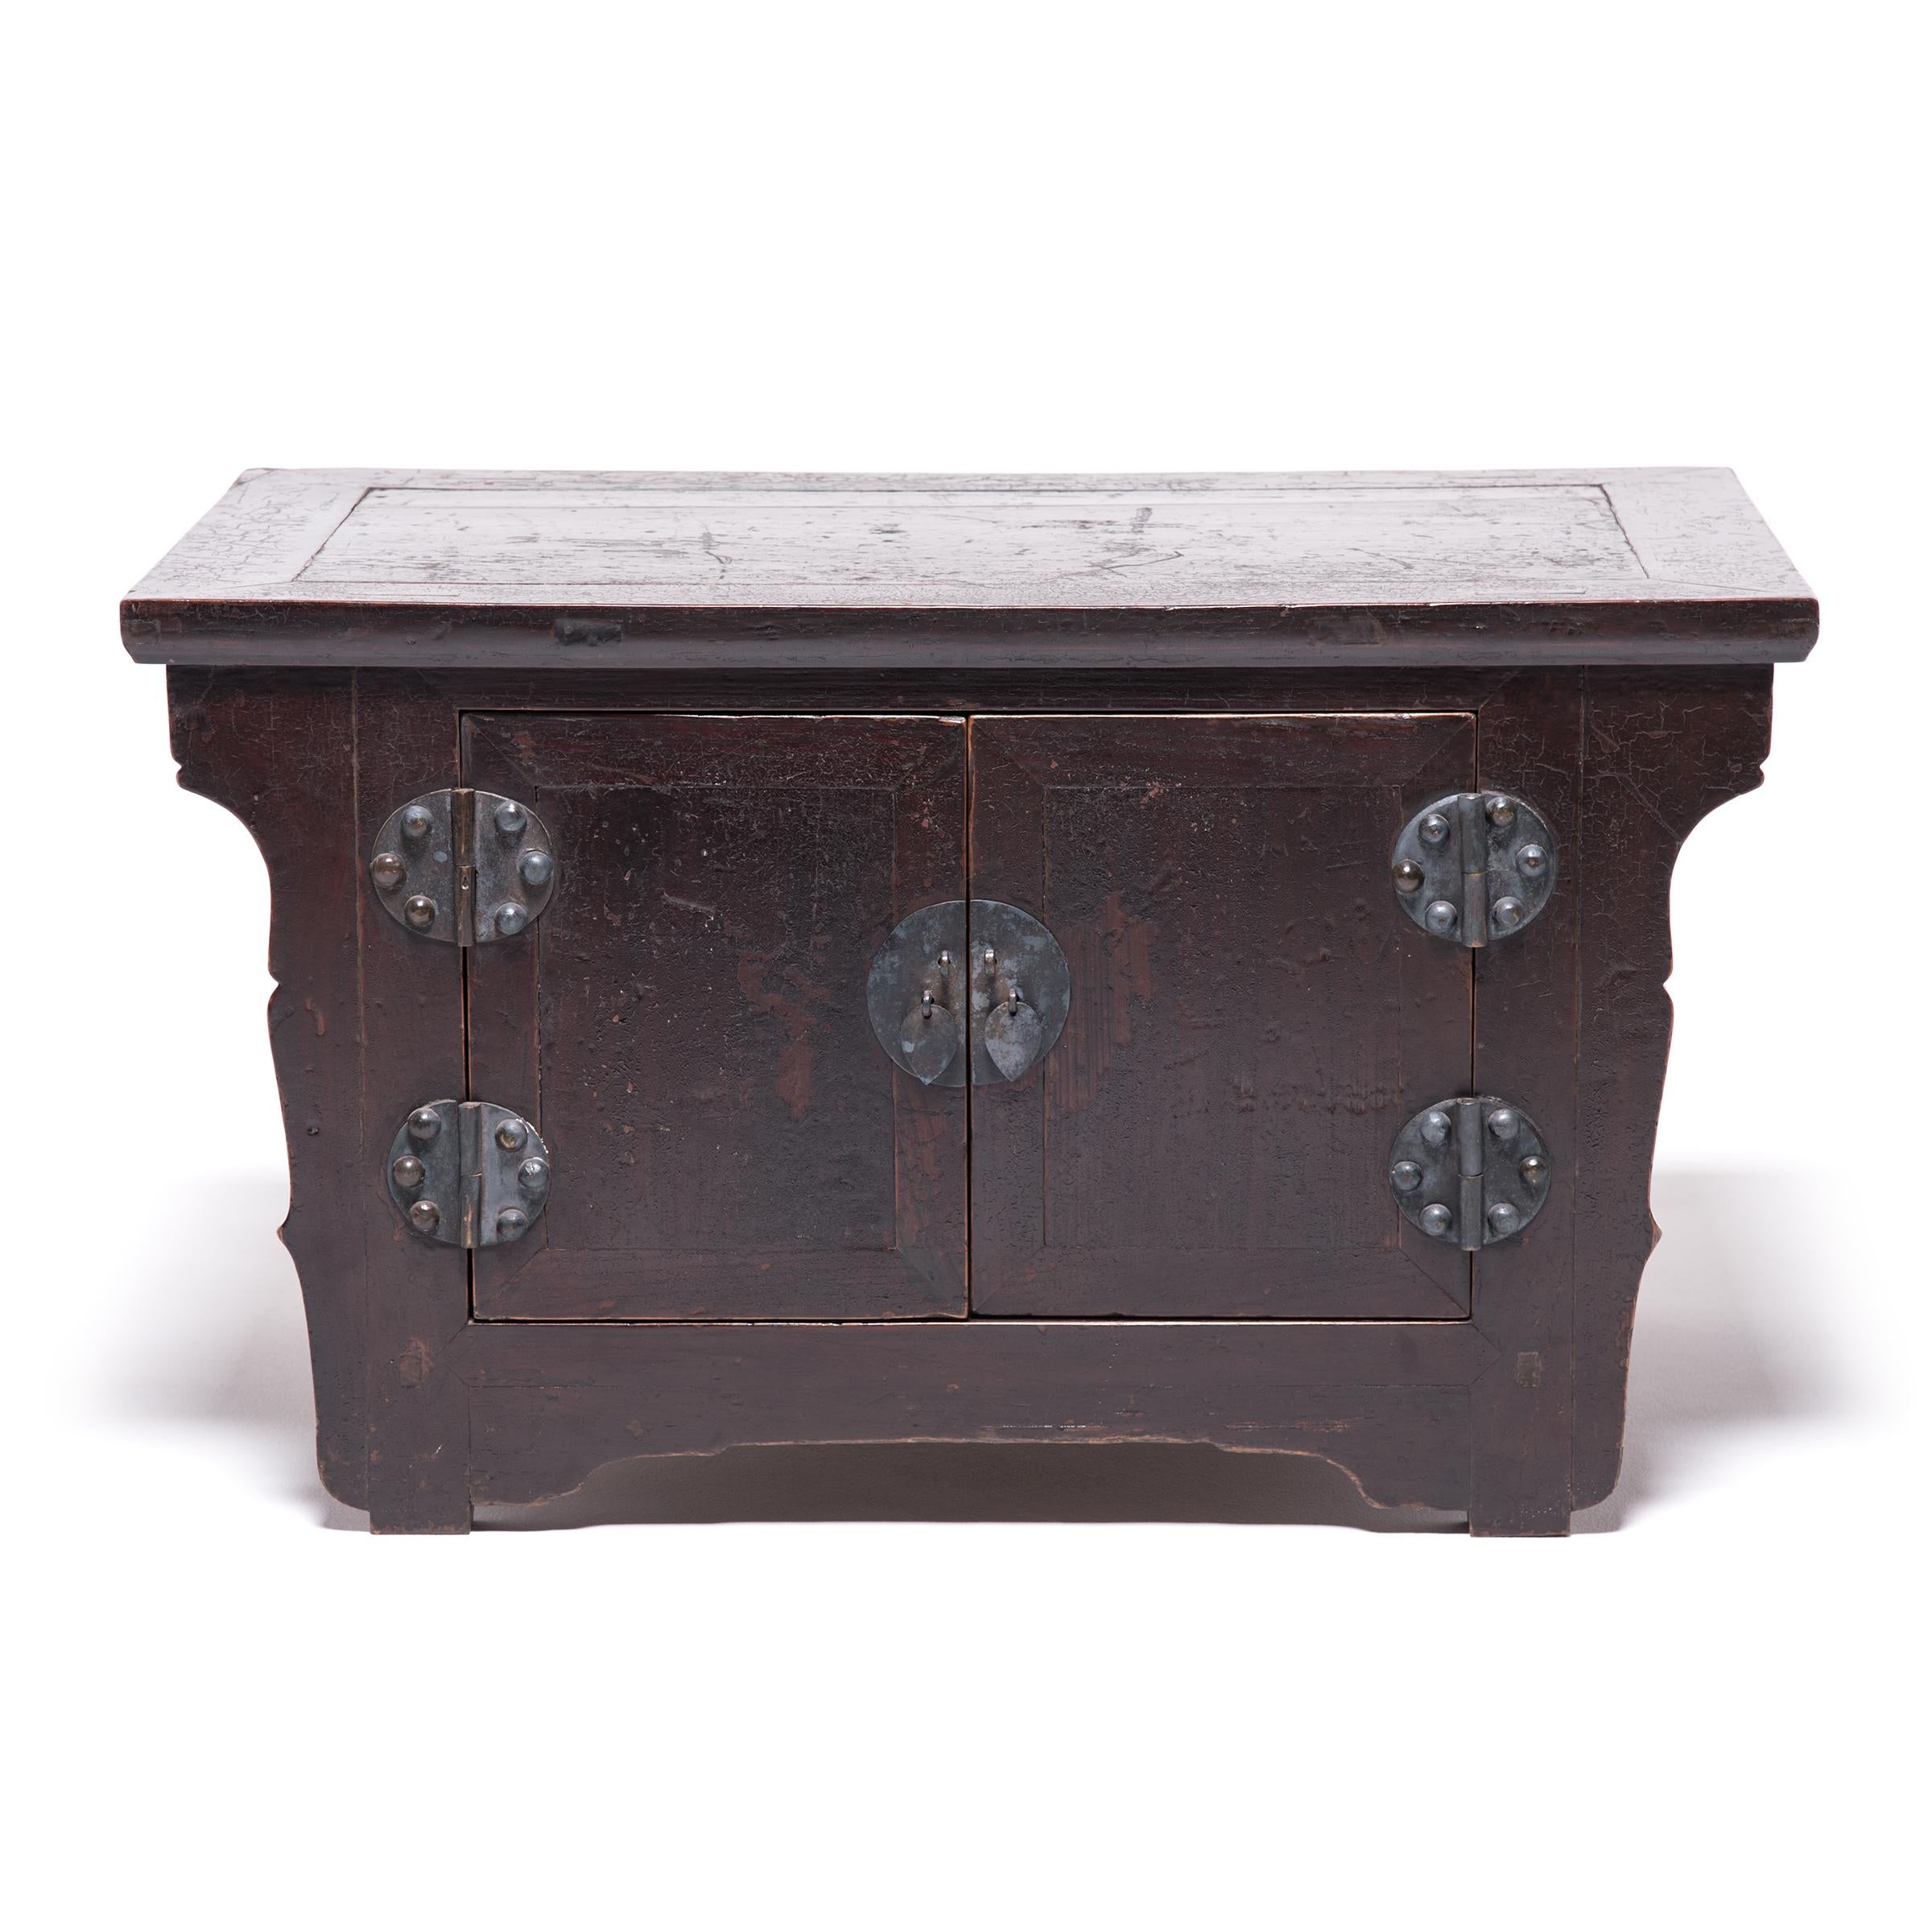 Exquisitely carved over a century ago in China’s Shanxi province, this pair of mid-19th century elmwood cabinets would have been placed upon a kang bed and used to store useful or intimate items. The beautifully scalloped edges and unusual, round